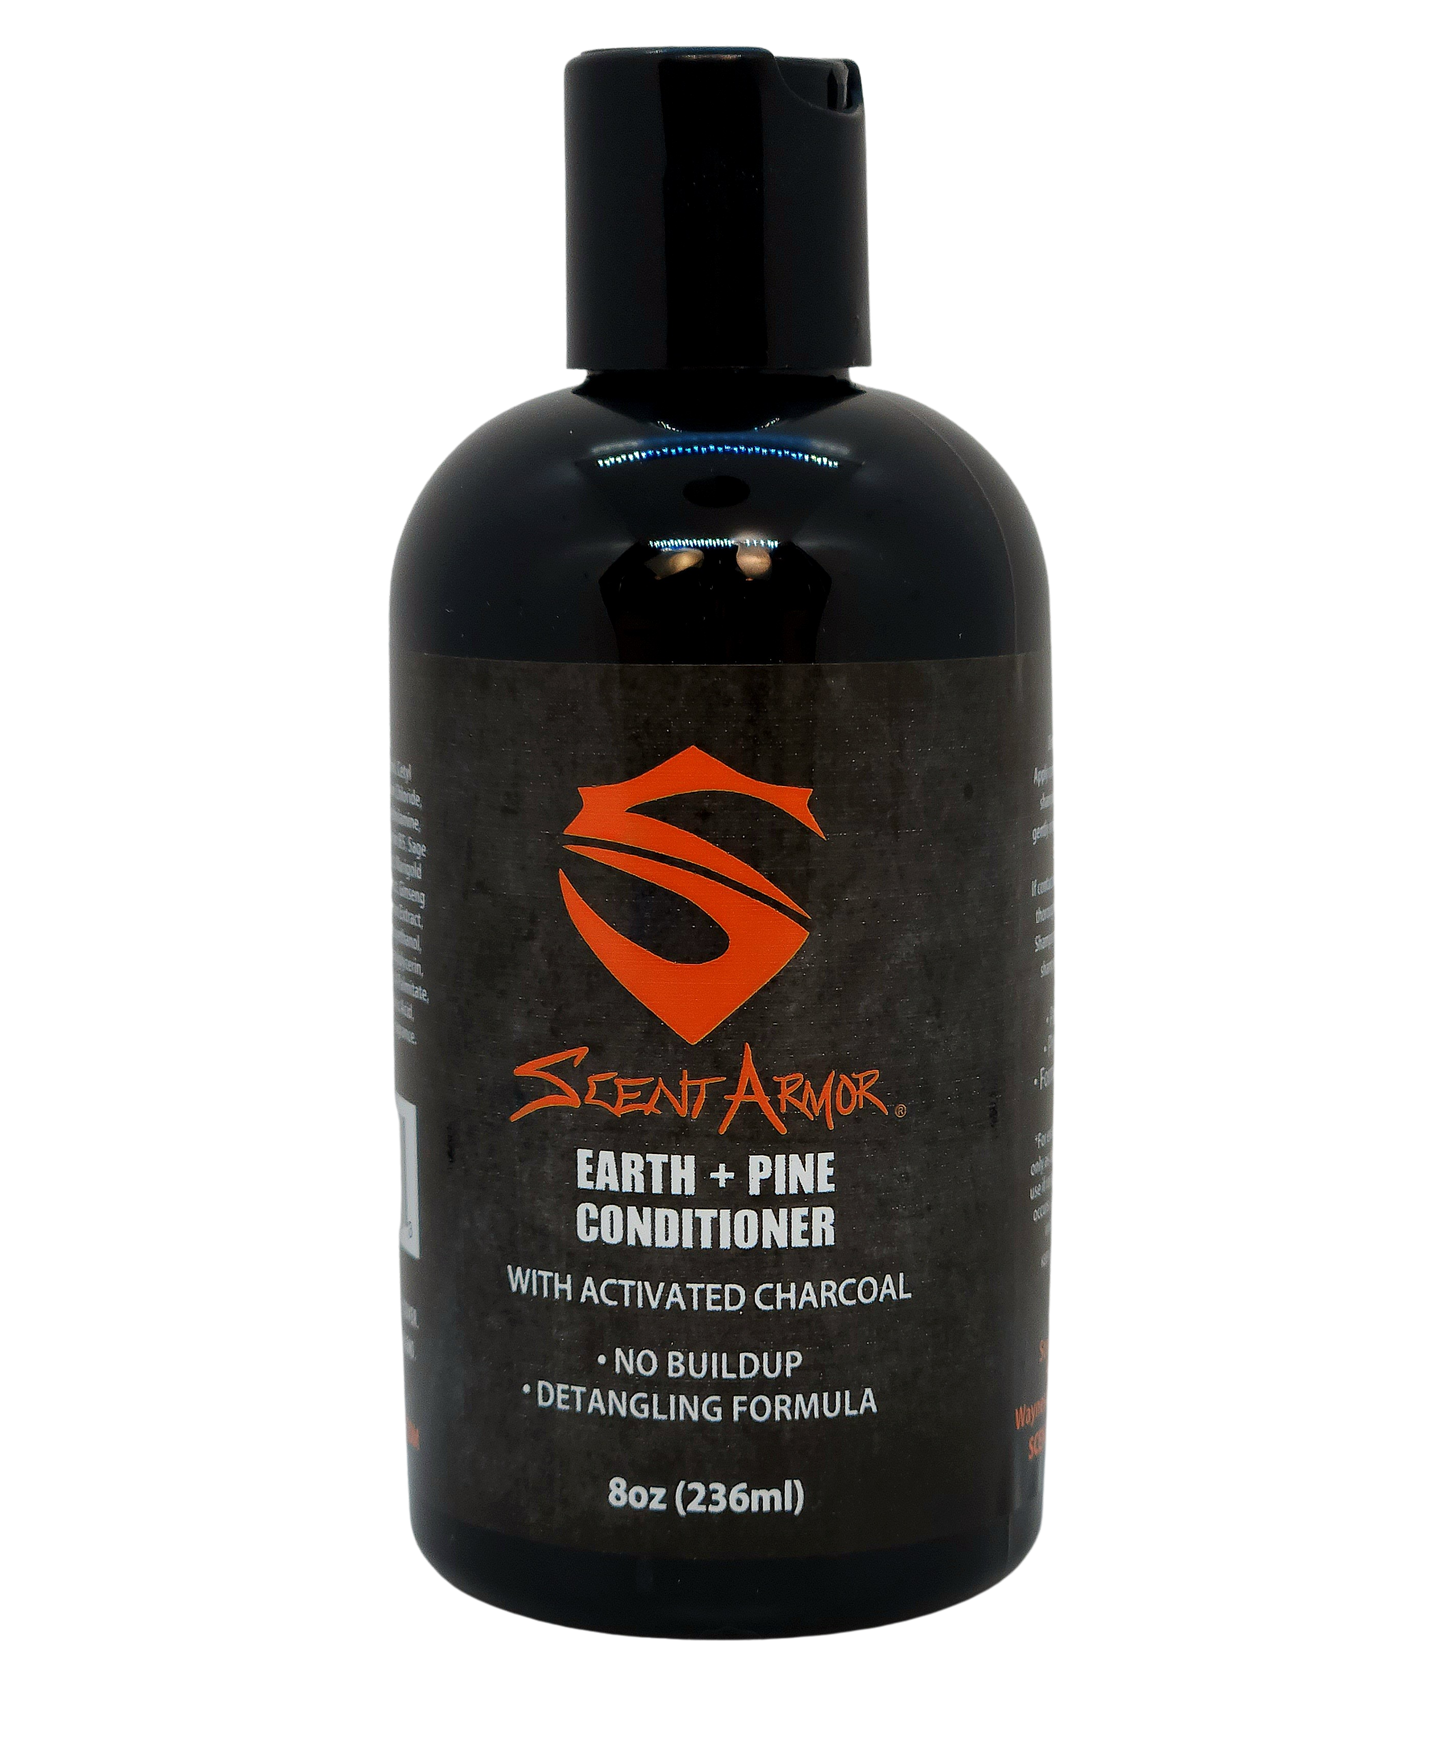 Earth + Pine Conditioner with Activated Charcoal